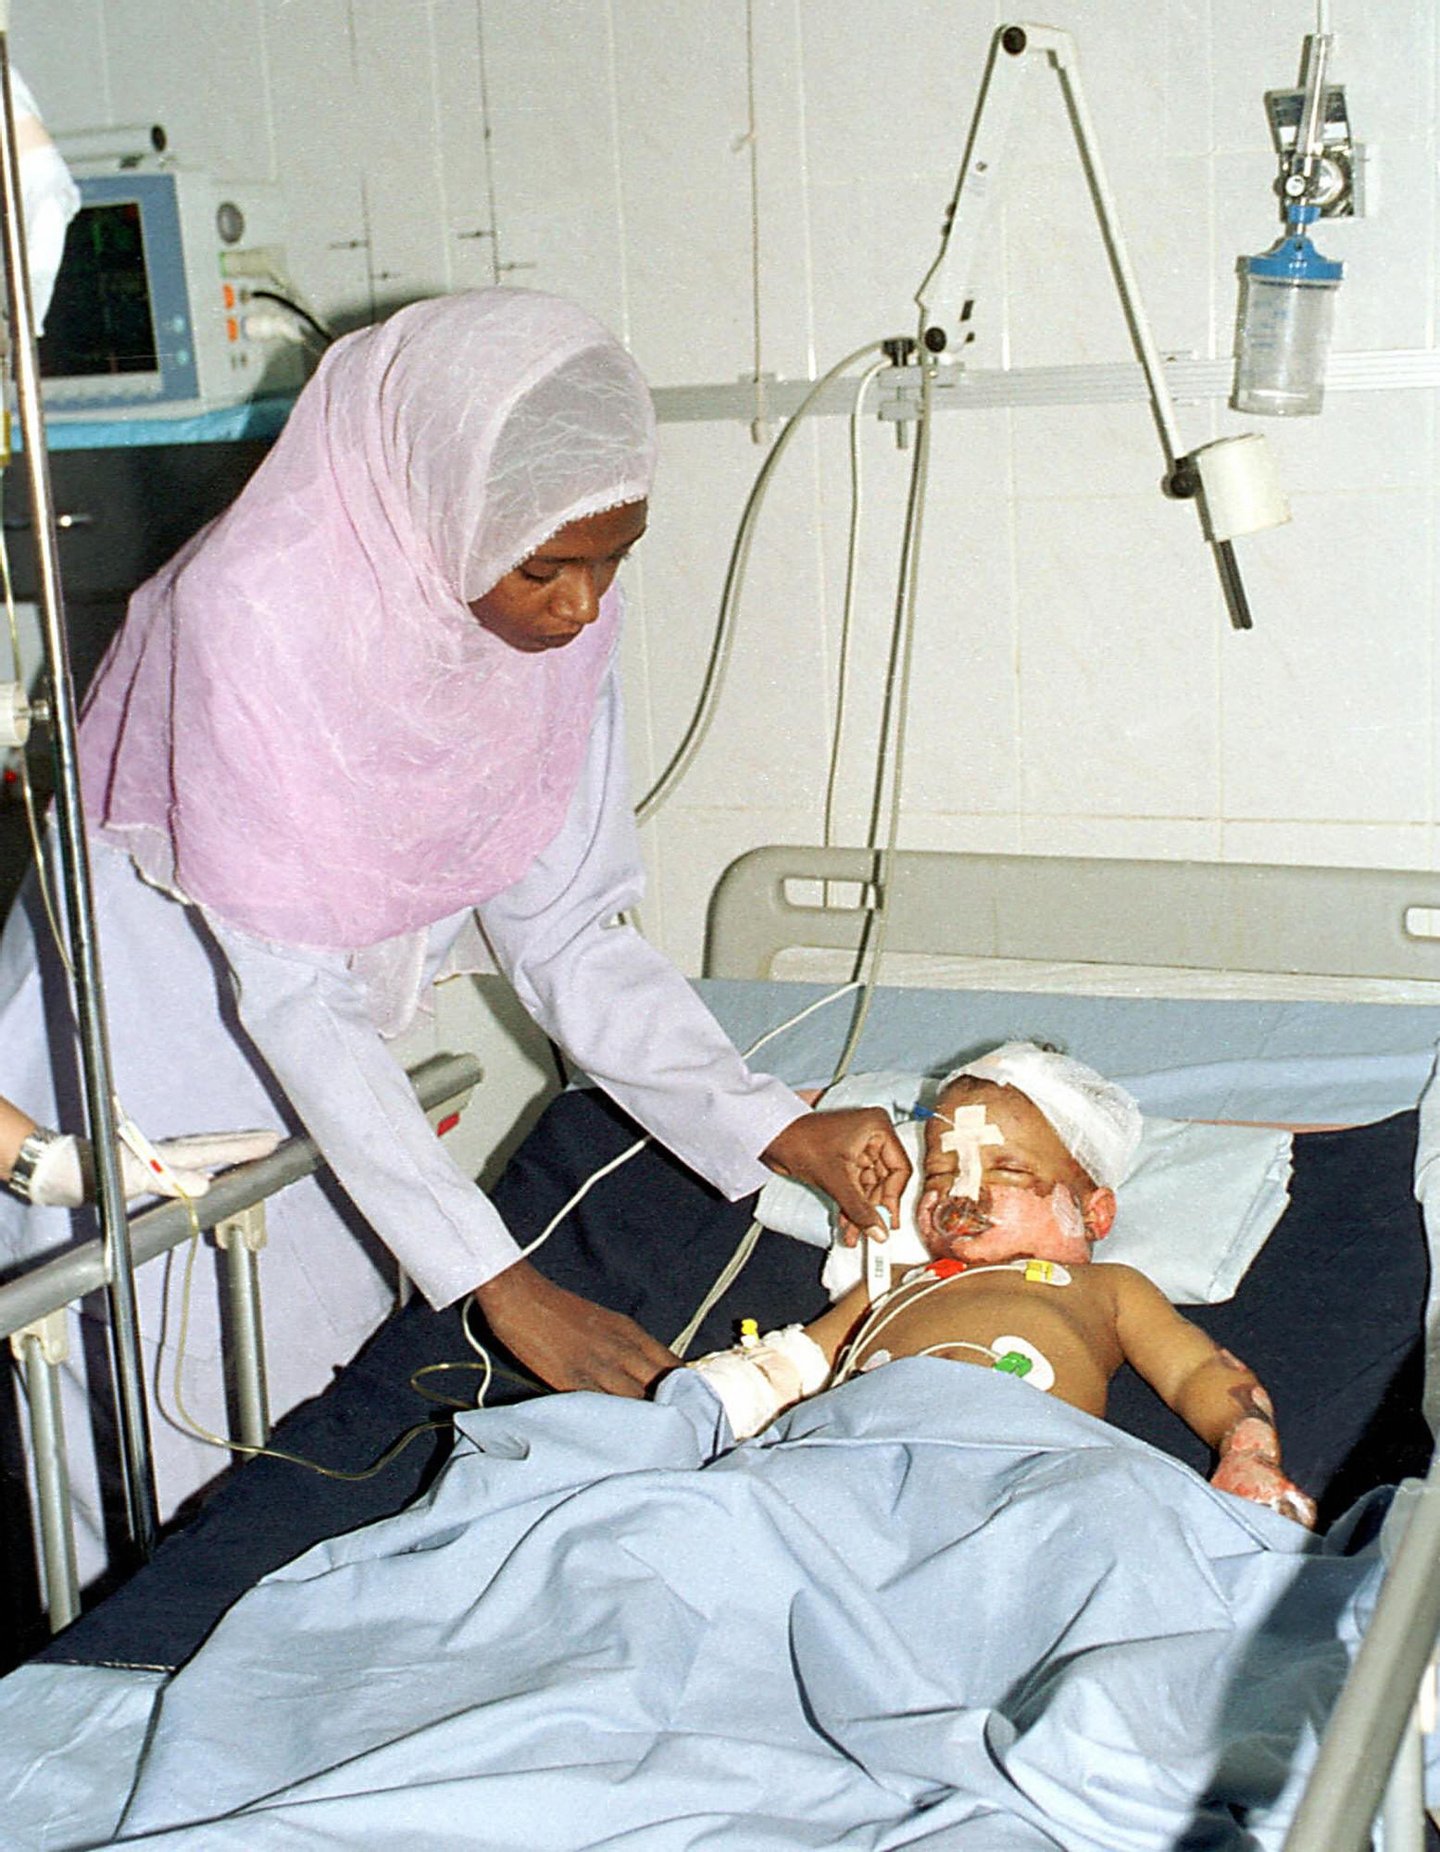 Three-year-old Sudanese boy Mohammed al-Fateh, the sole survivor of a Sudan Airways plane crash near the eastern city of Port Sudan, is treated at a Khartoum hospital 09 July 2003. Doctors were mystified as to how the boy, who was burned and lost part of a leg, had survived the previous day's crash near Sudan's Red Sea coast, speculating that he was thrown clear of the plane on a piece of wreckage and may have landed on a bush. The Sudan Airways Boeing 737 was destroyed in a ball of fire as it attempted to land back at Port Sudan after apparently suffering an engine problem soon after takeoff. (Film) AFP PHOTO/Salah OMAR (Photo credit should read SALAH OMAR/AFP/Getty Images)